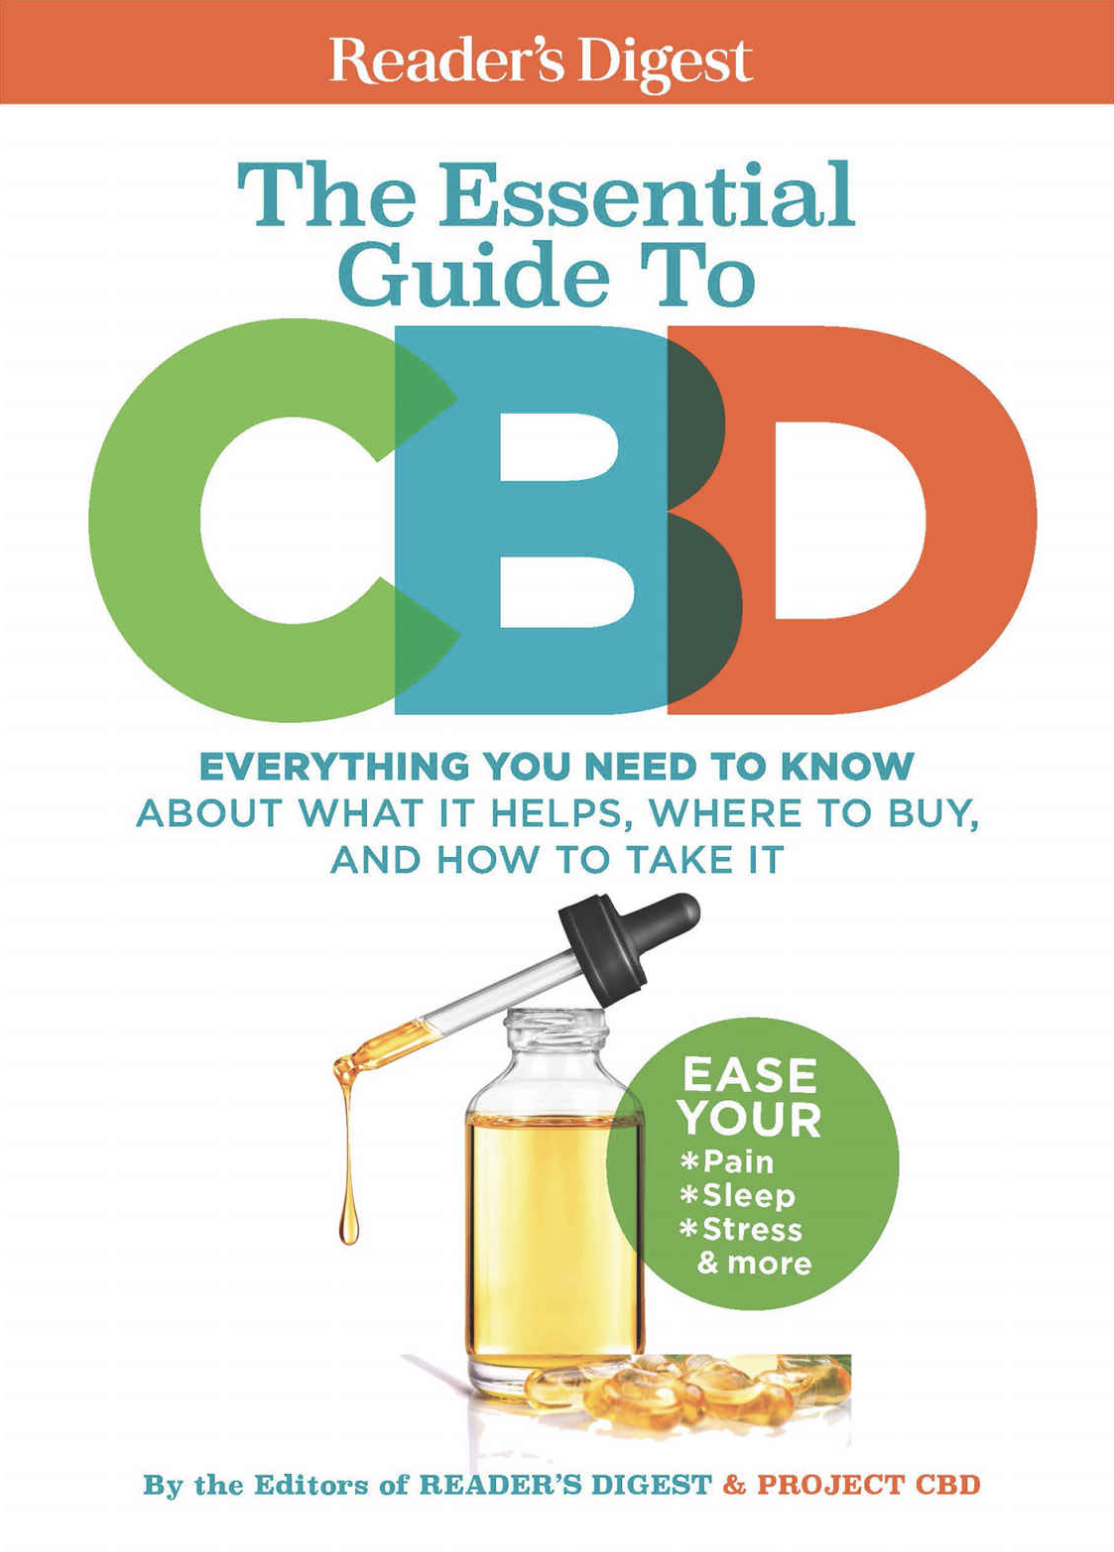 READER'S DIGEST THE ESSENTIAL GUIDE TO CBD: EVERYTHING YOU NEED TO KNOW ABOUT WHAT IT HELPS, WHERE